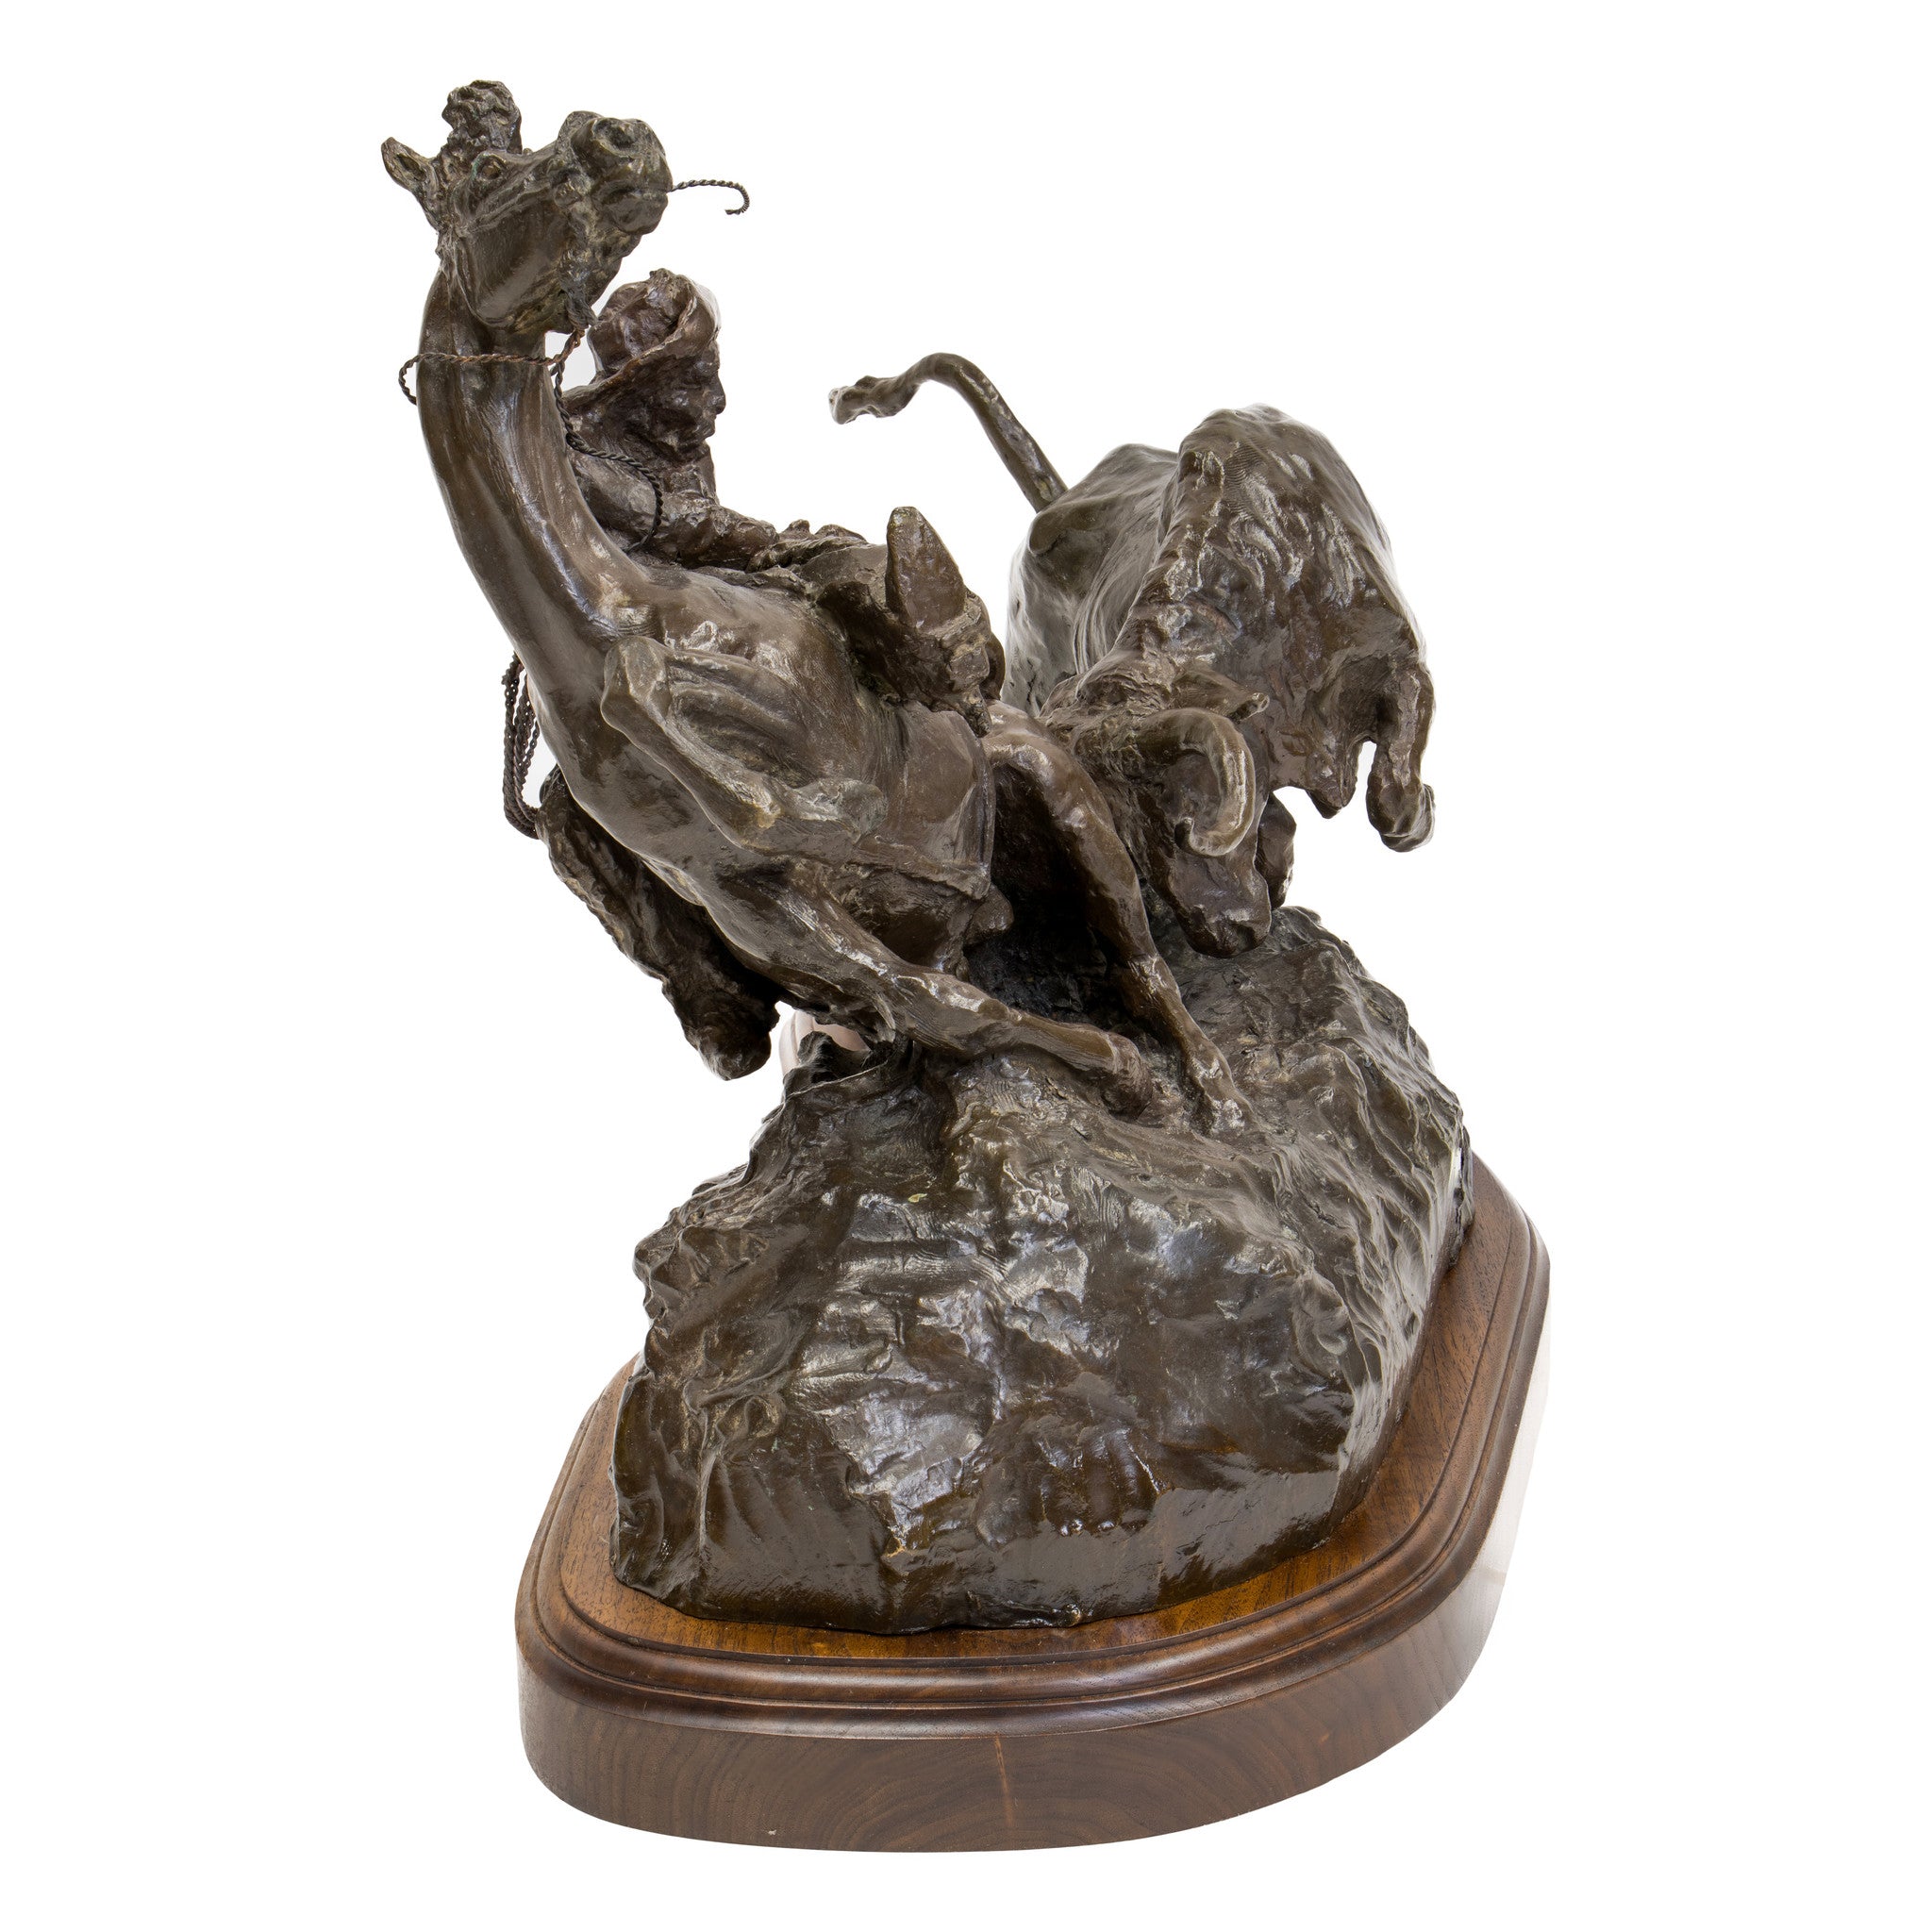 "When you Really Need a .45" Bronze by Robert Scriver